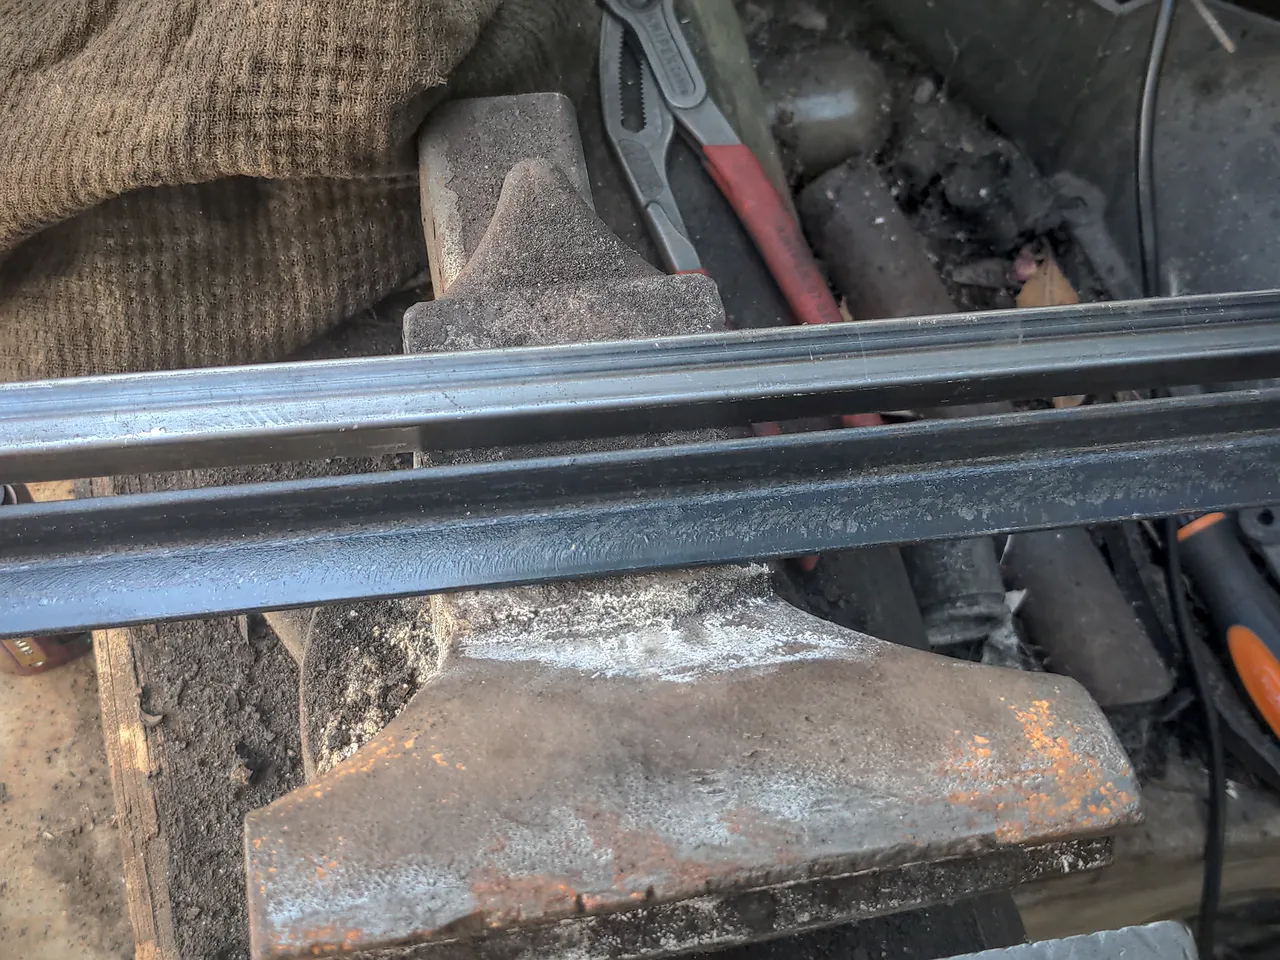 A length of 20mm box section steel and some 20mm angle iron.